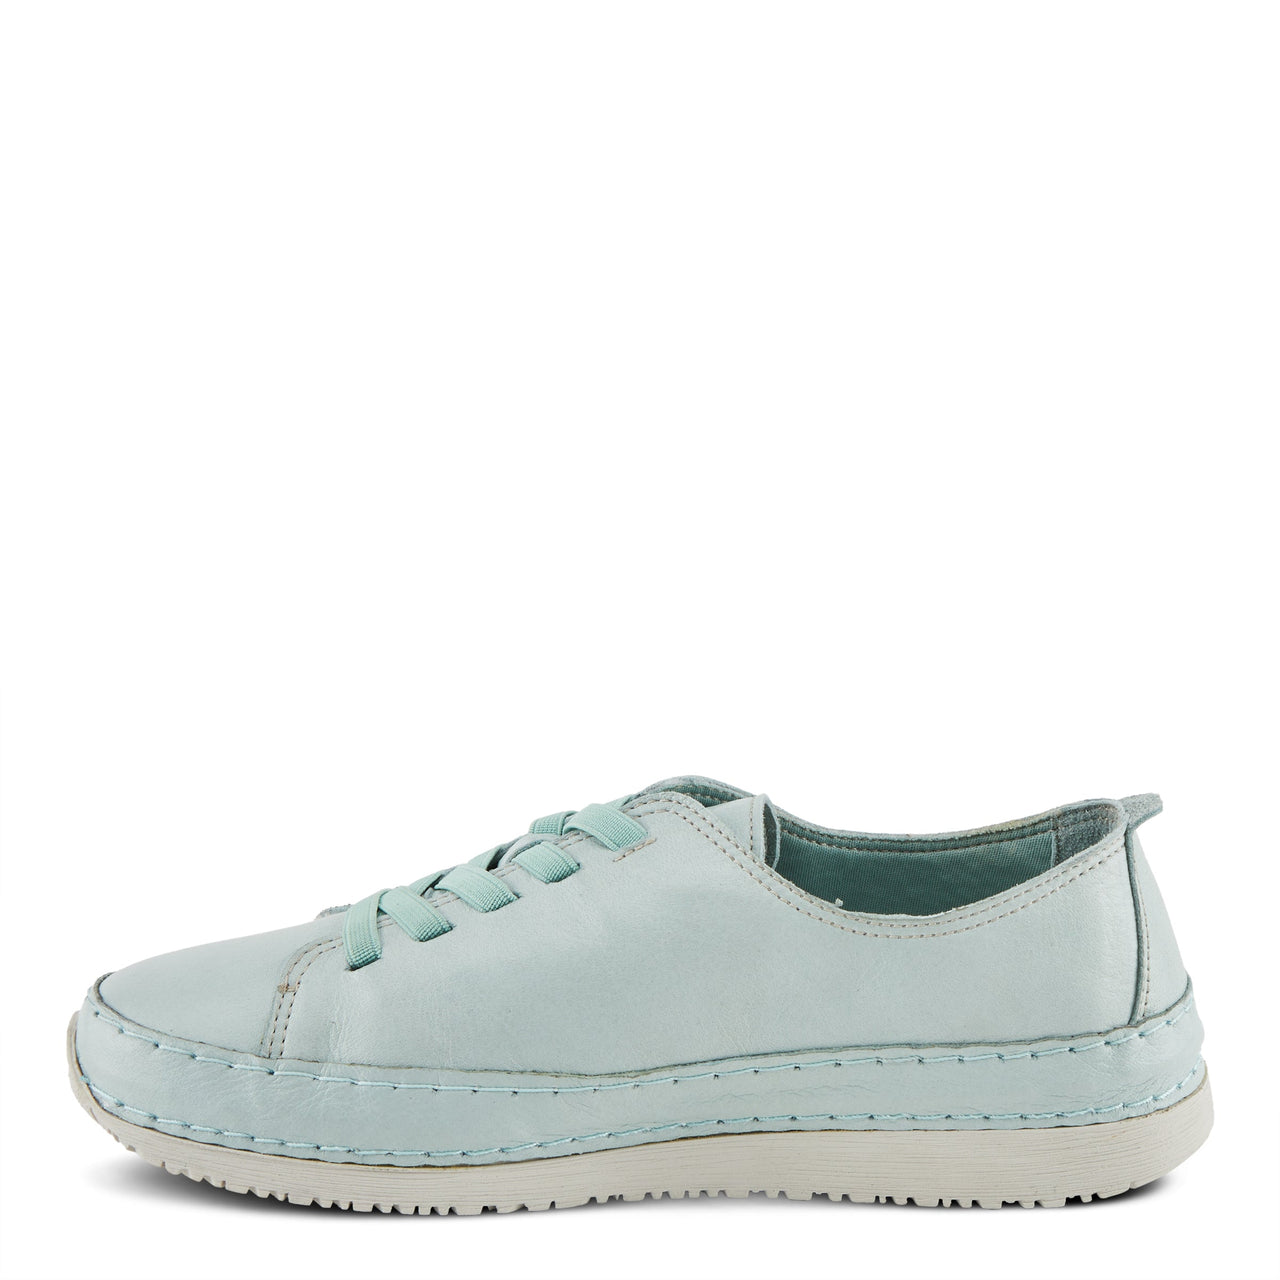 Spring Step Abeck Sneakers in white and blue, stylish and comfortable footwear for everyday wear